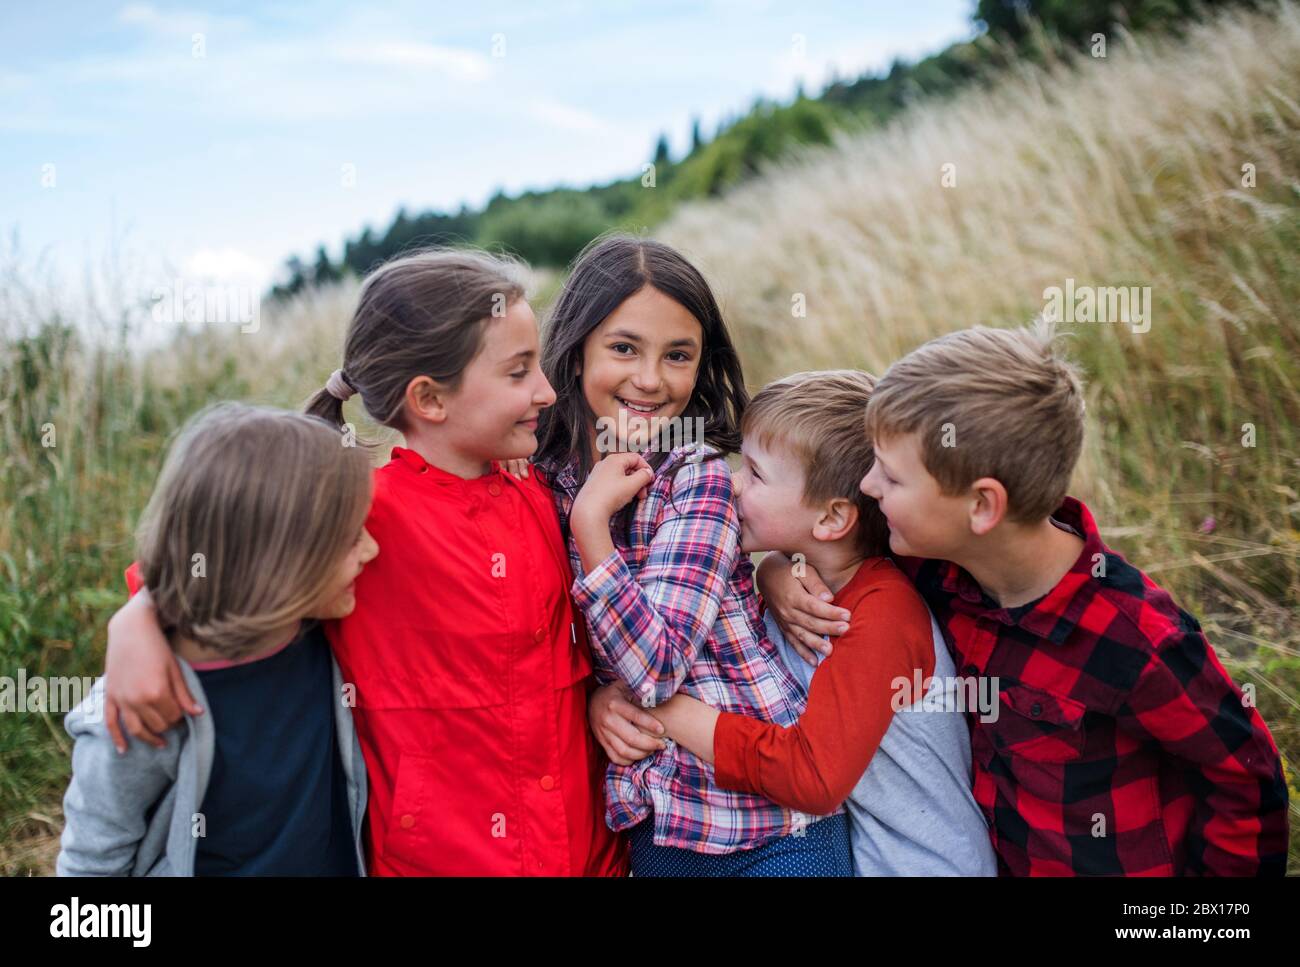 Group of school children standing on field trip in nature, playing. Stock Photo